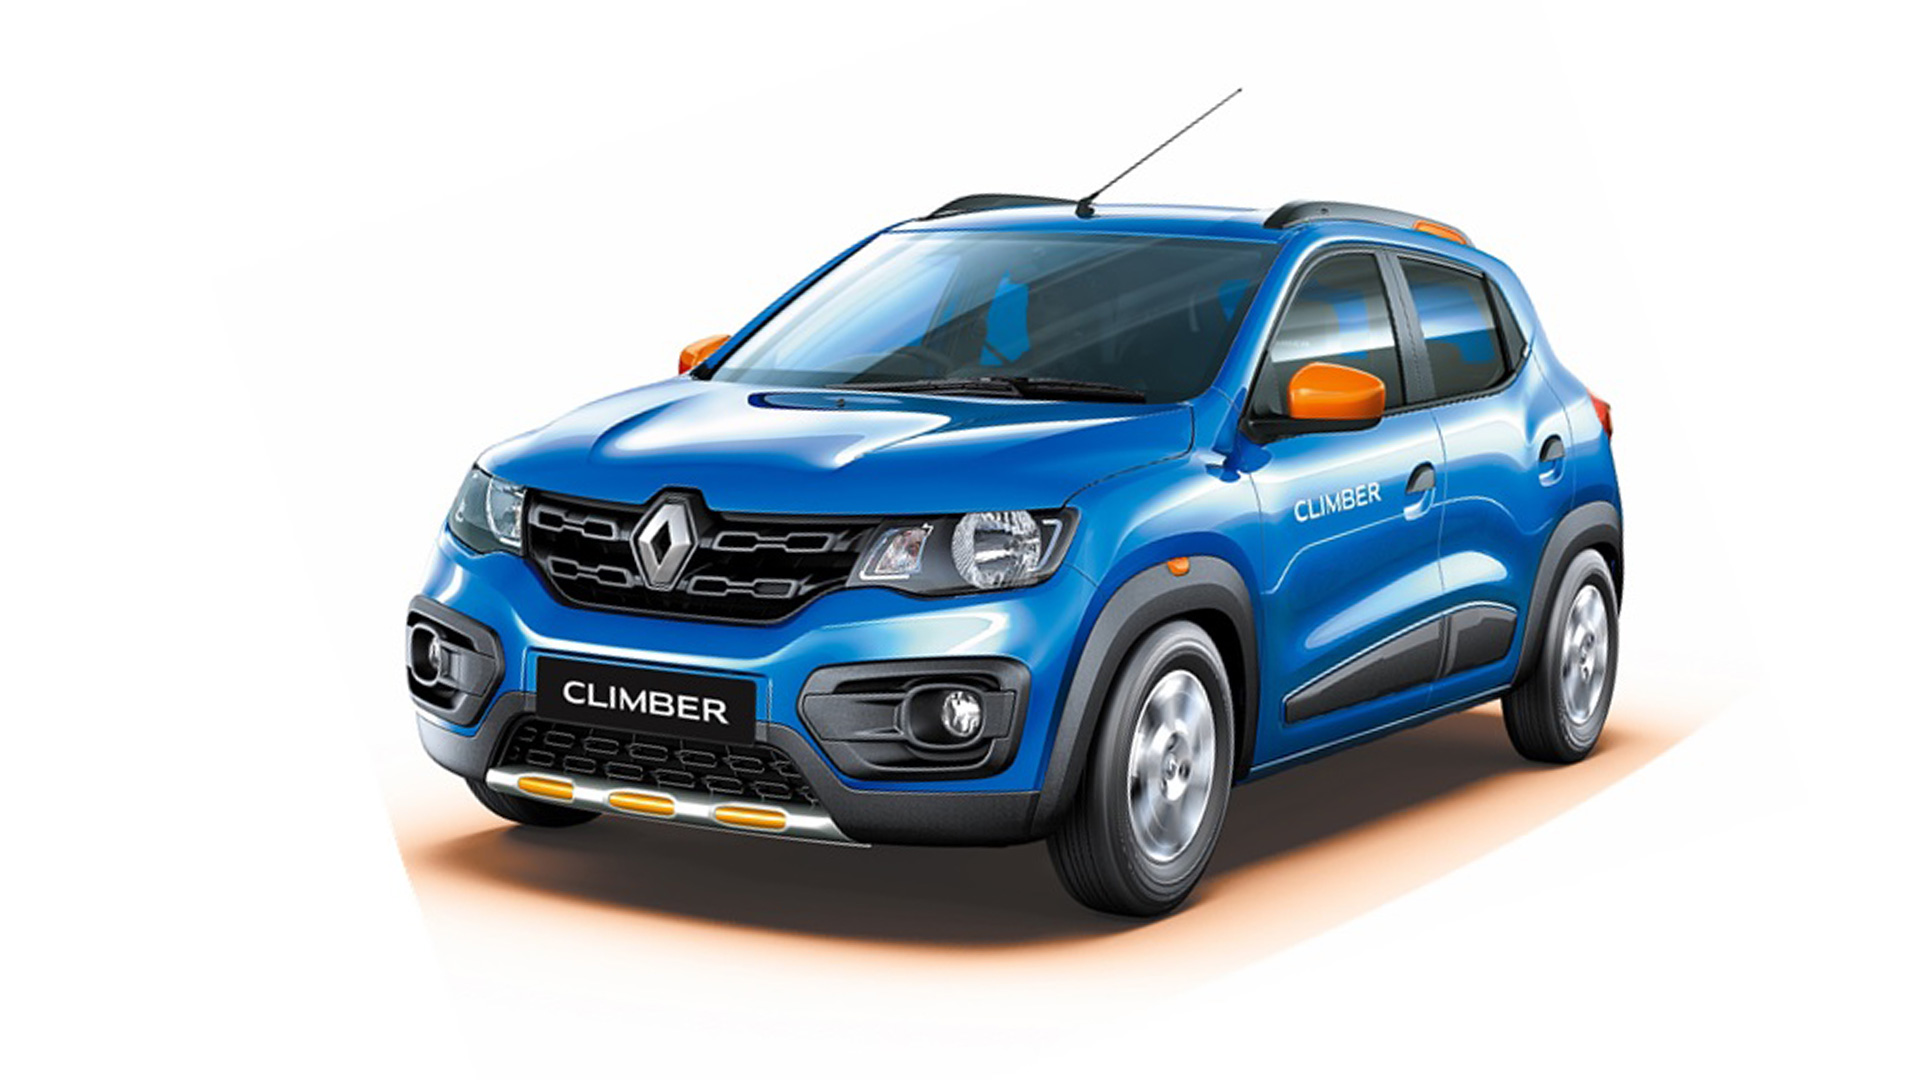 Renault Kwid Car Images With Price